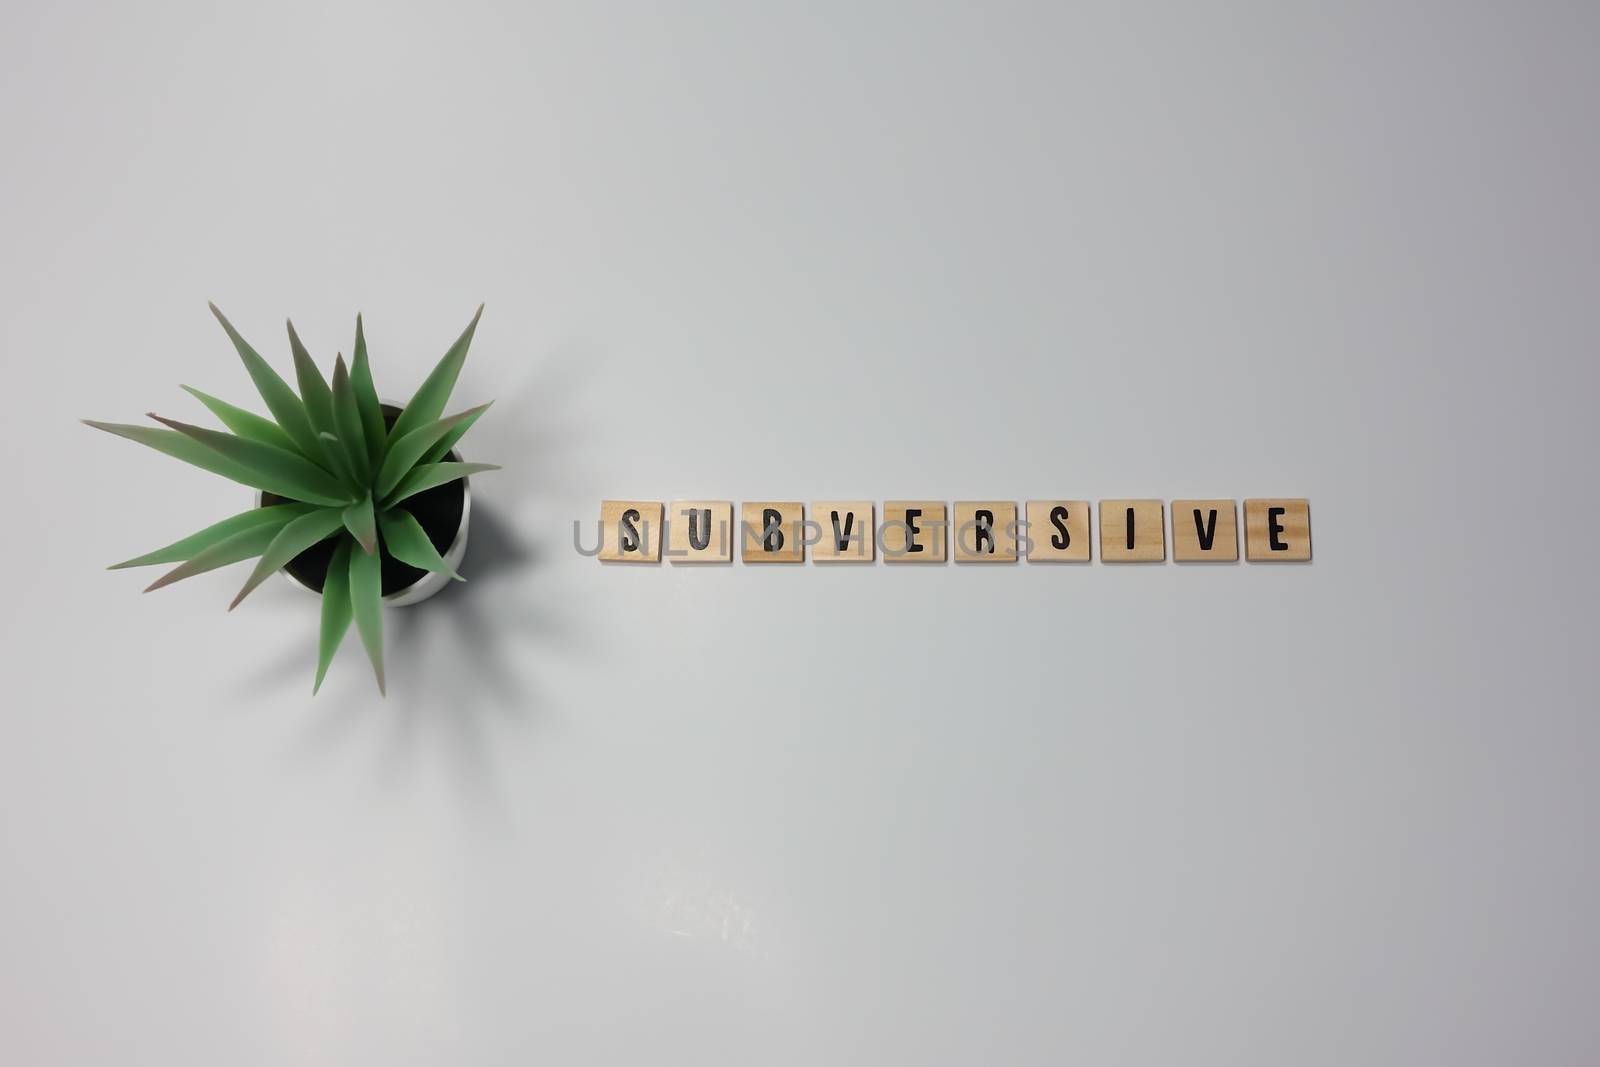 The word Subversive written in wooden letter tiles on a white ba by Jshanebutt